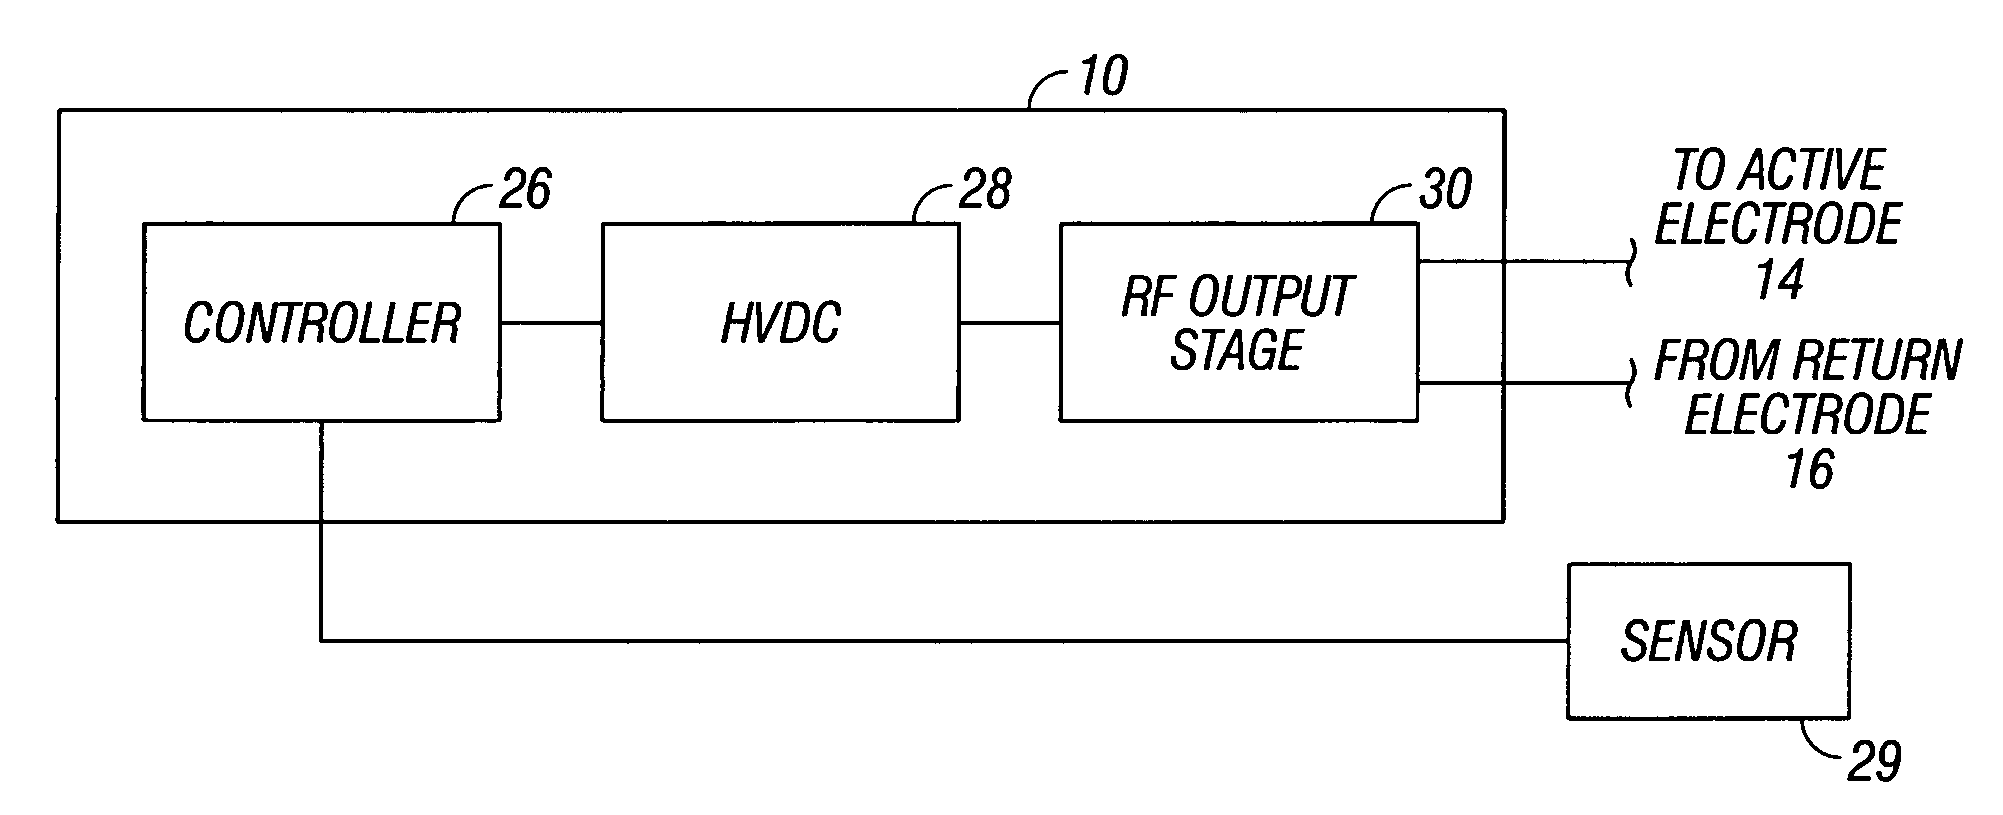 Circuit and method for reducing stored energy in an electrosurgical generator